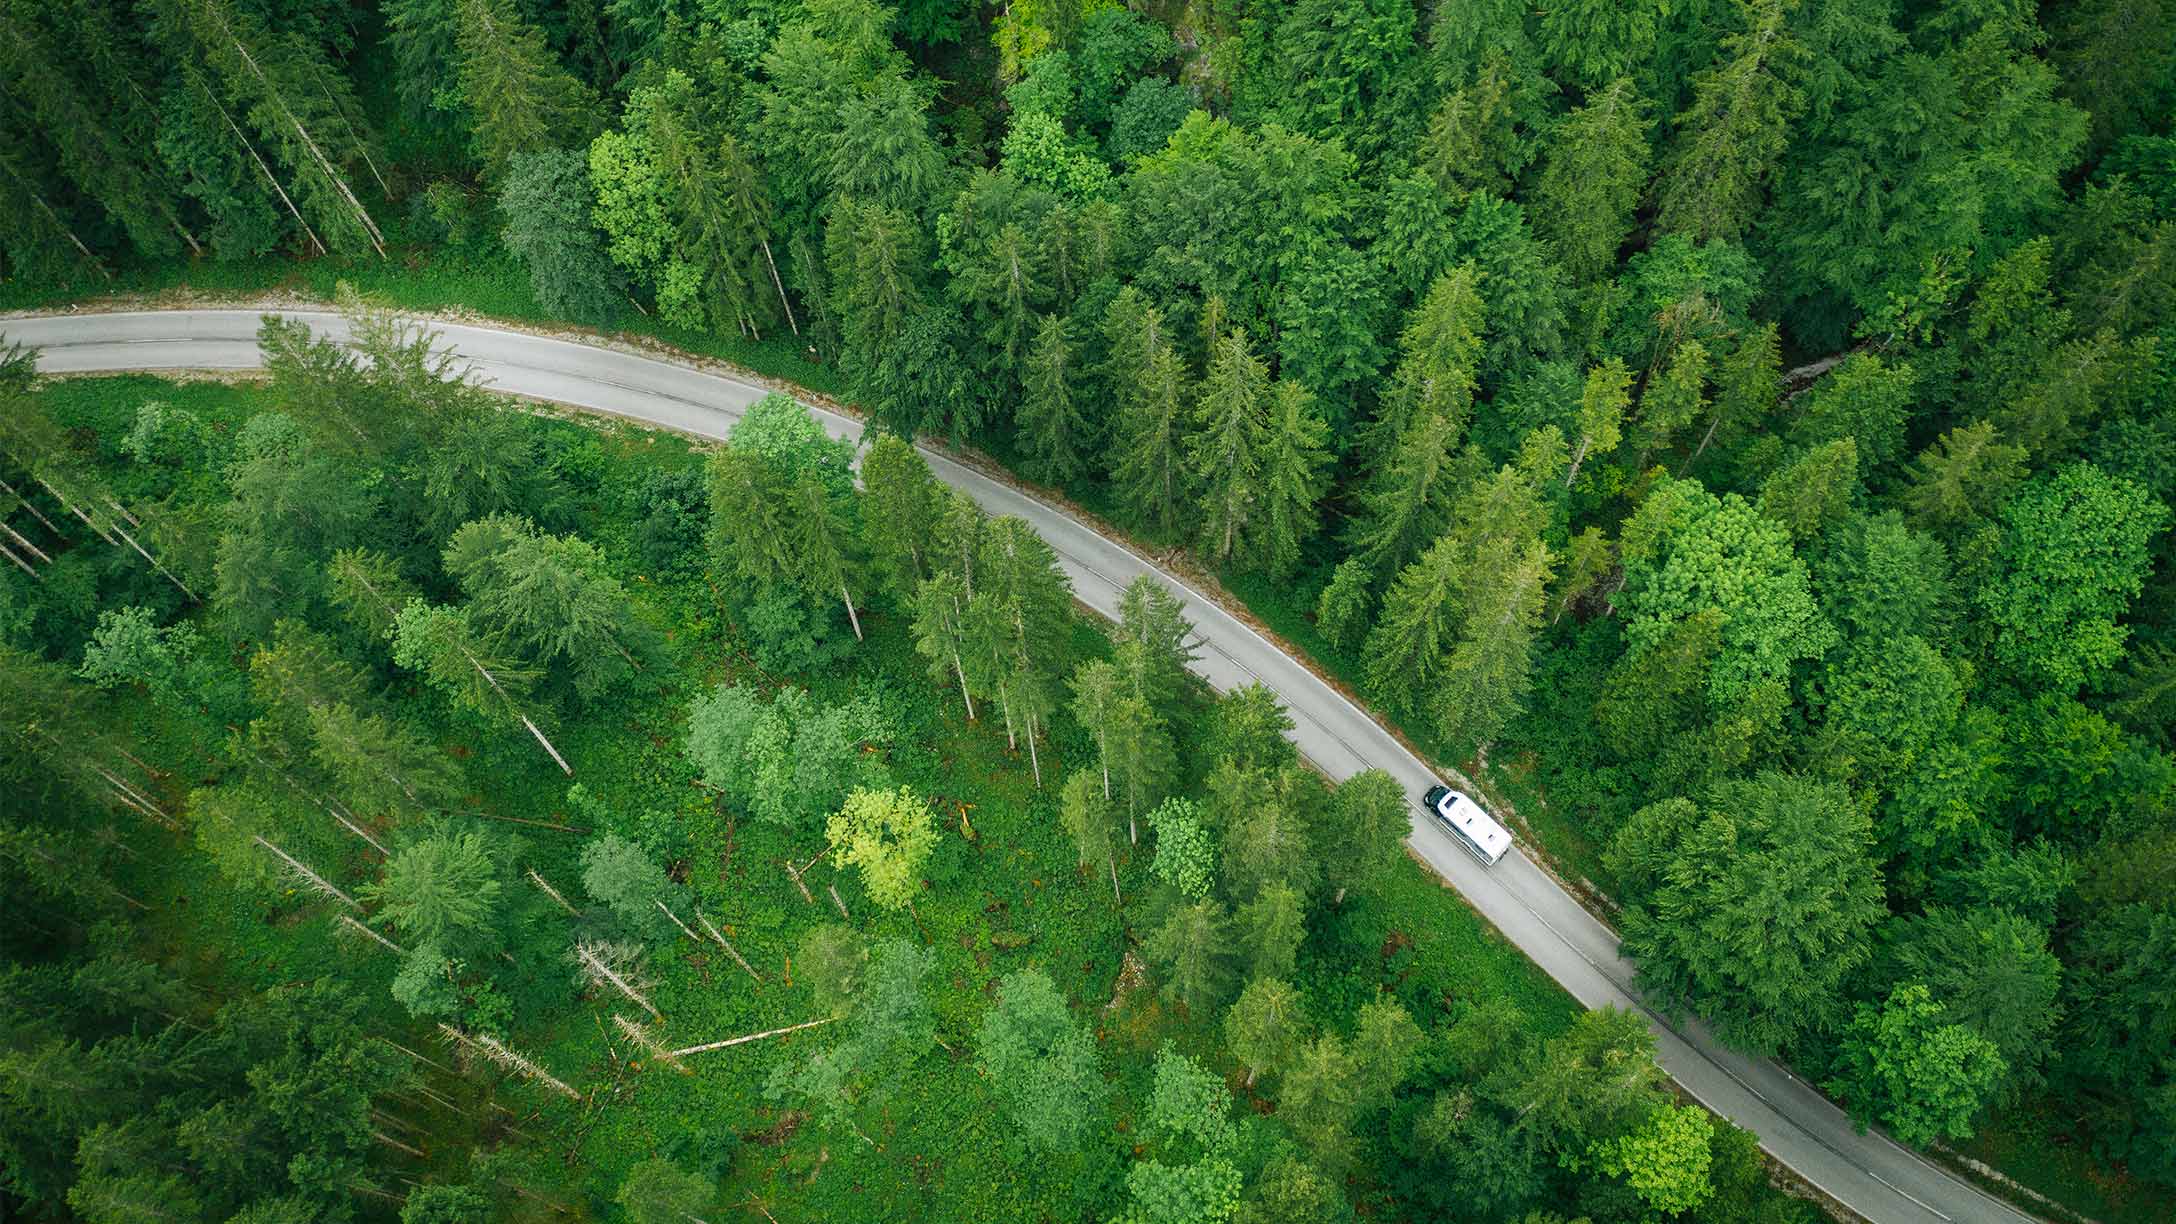 Car driving on a street in a forest area.